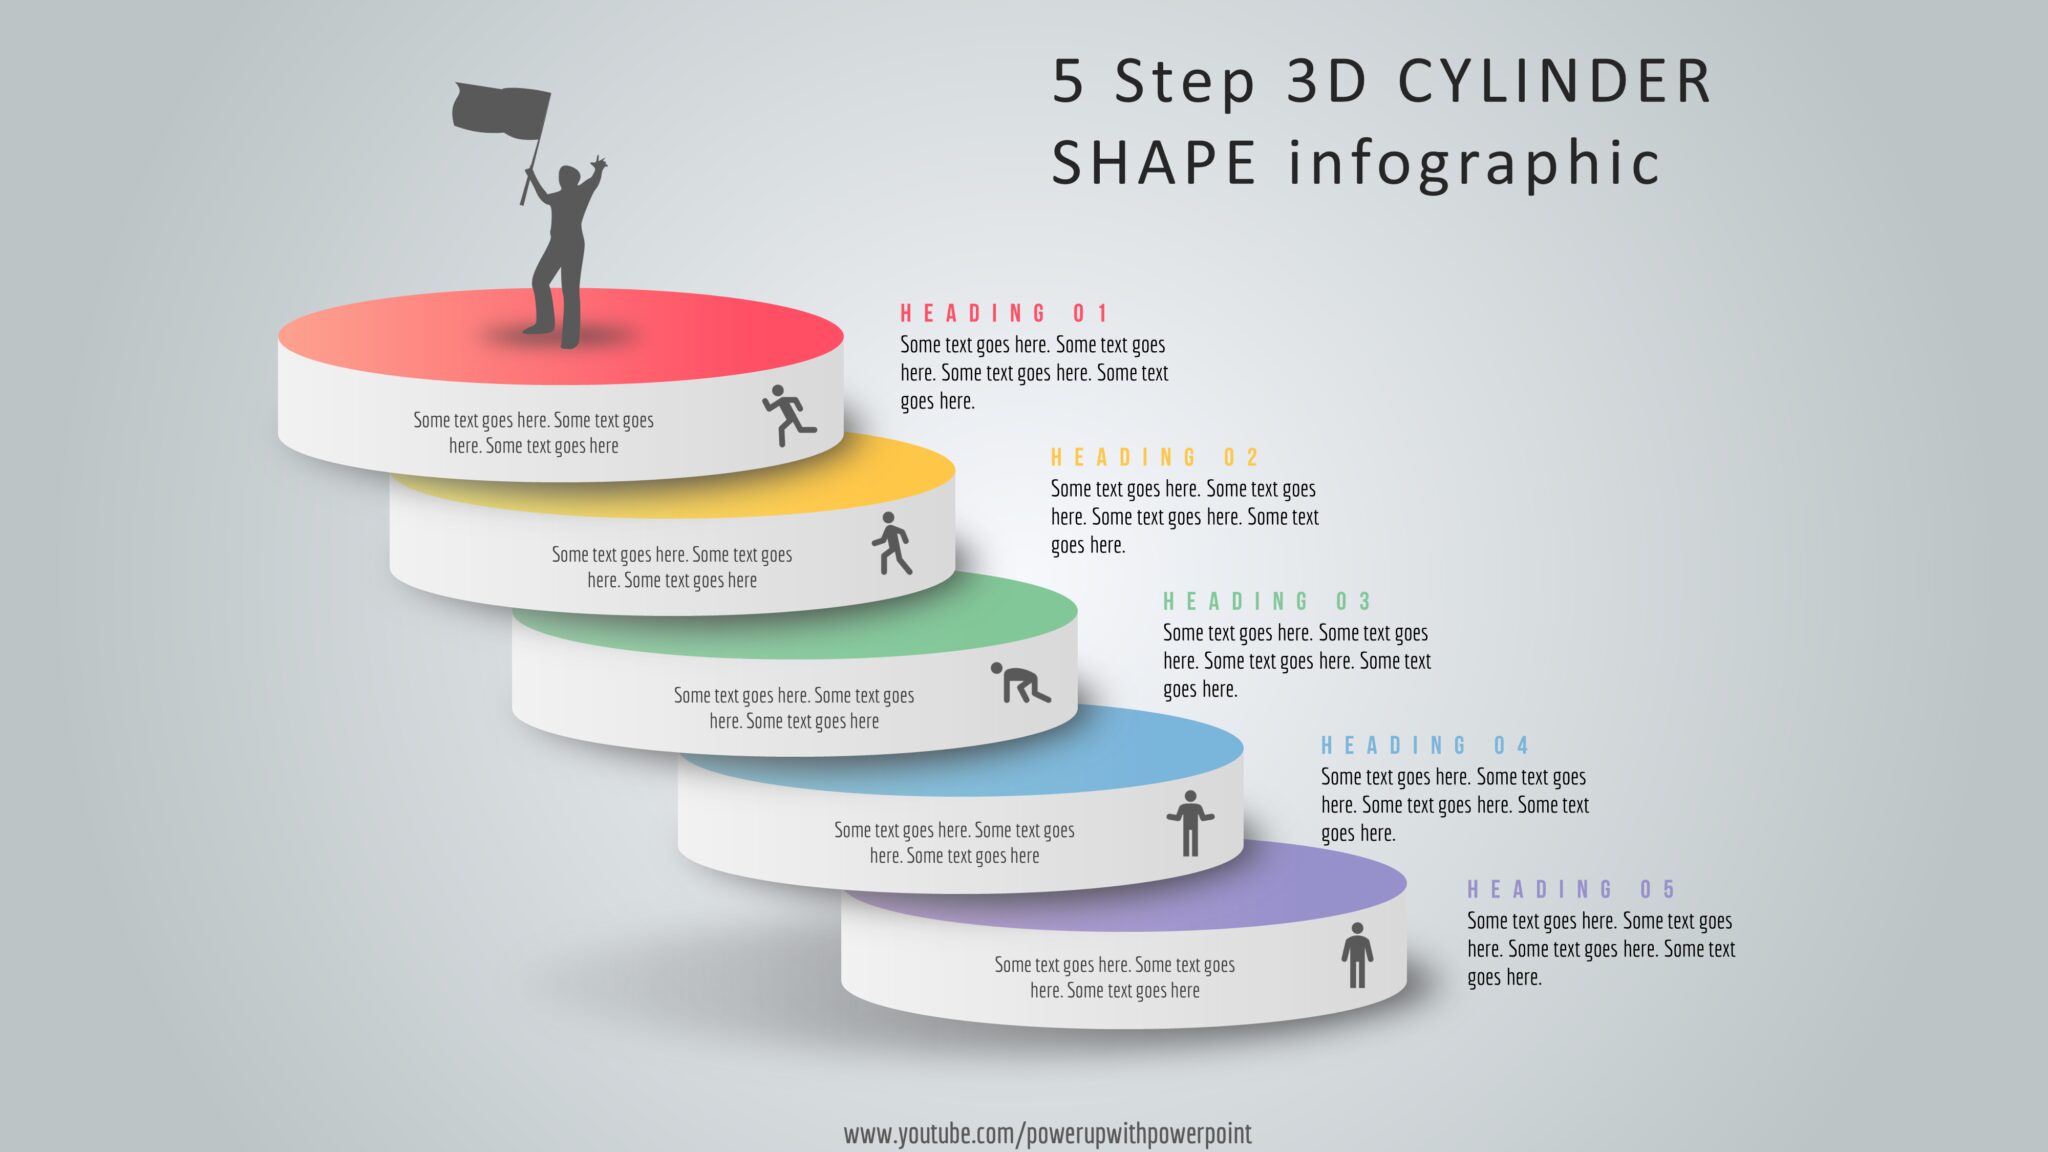 Download Powerpoint 5 Step 3d Circular Infographic 70 Powerup With Powerpoint 2674